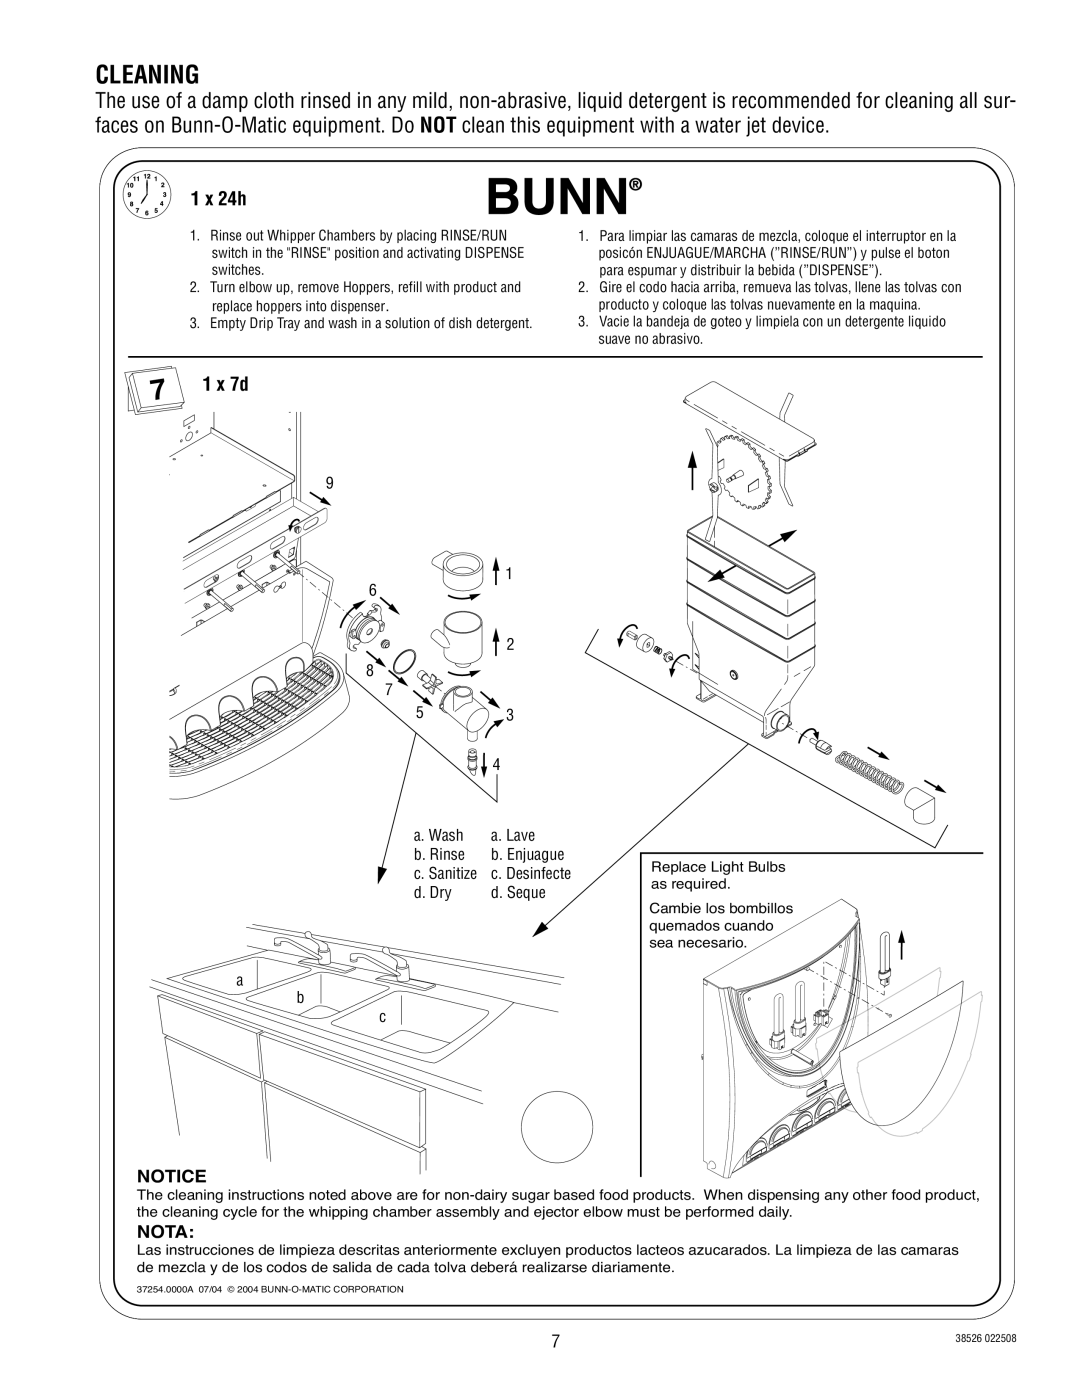 Bunn 5S service manual Cleaning, 1 x 24h, 1 x 7d, Nota, a. Wash, a. Lave, b. Rinse, d. Dry, d. Seque, a b c 